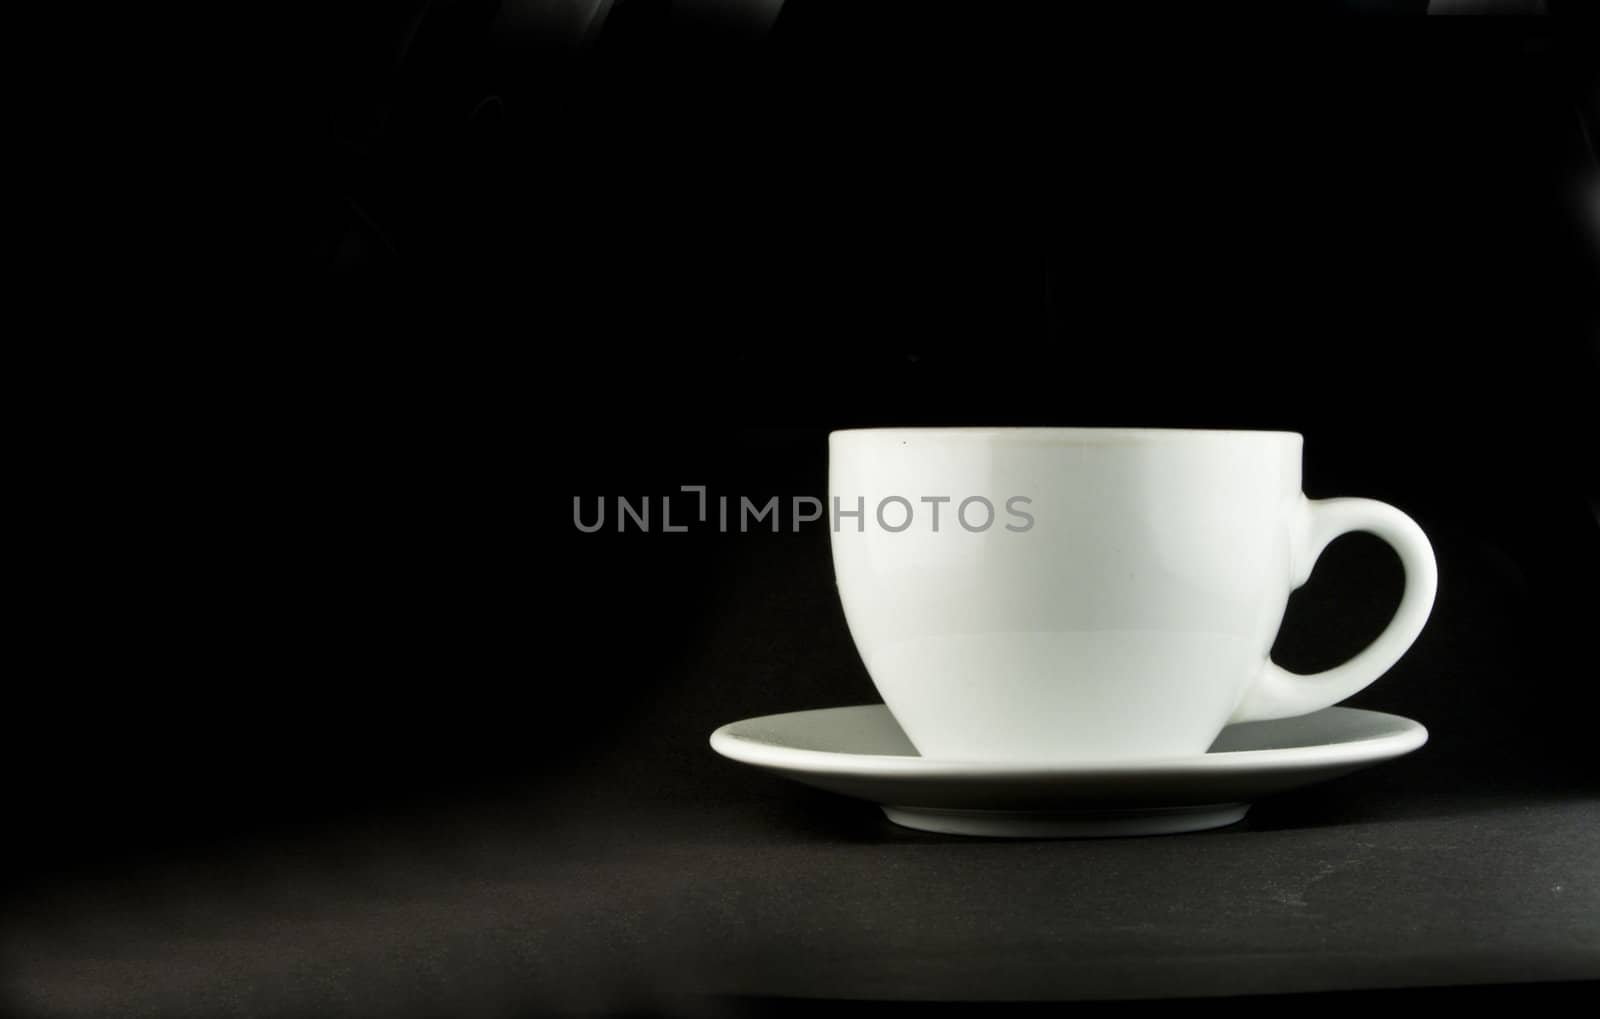 Perfect white coffee cup on a black background